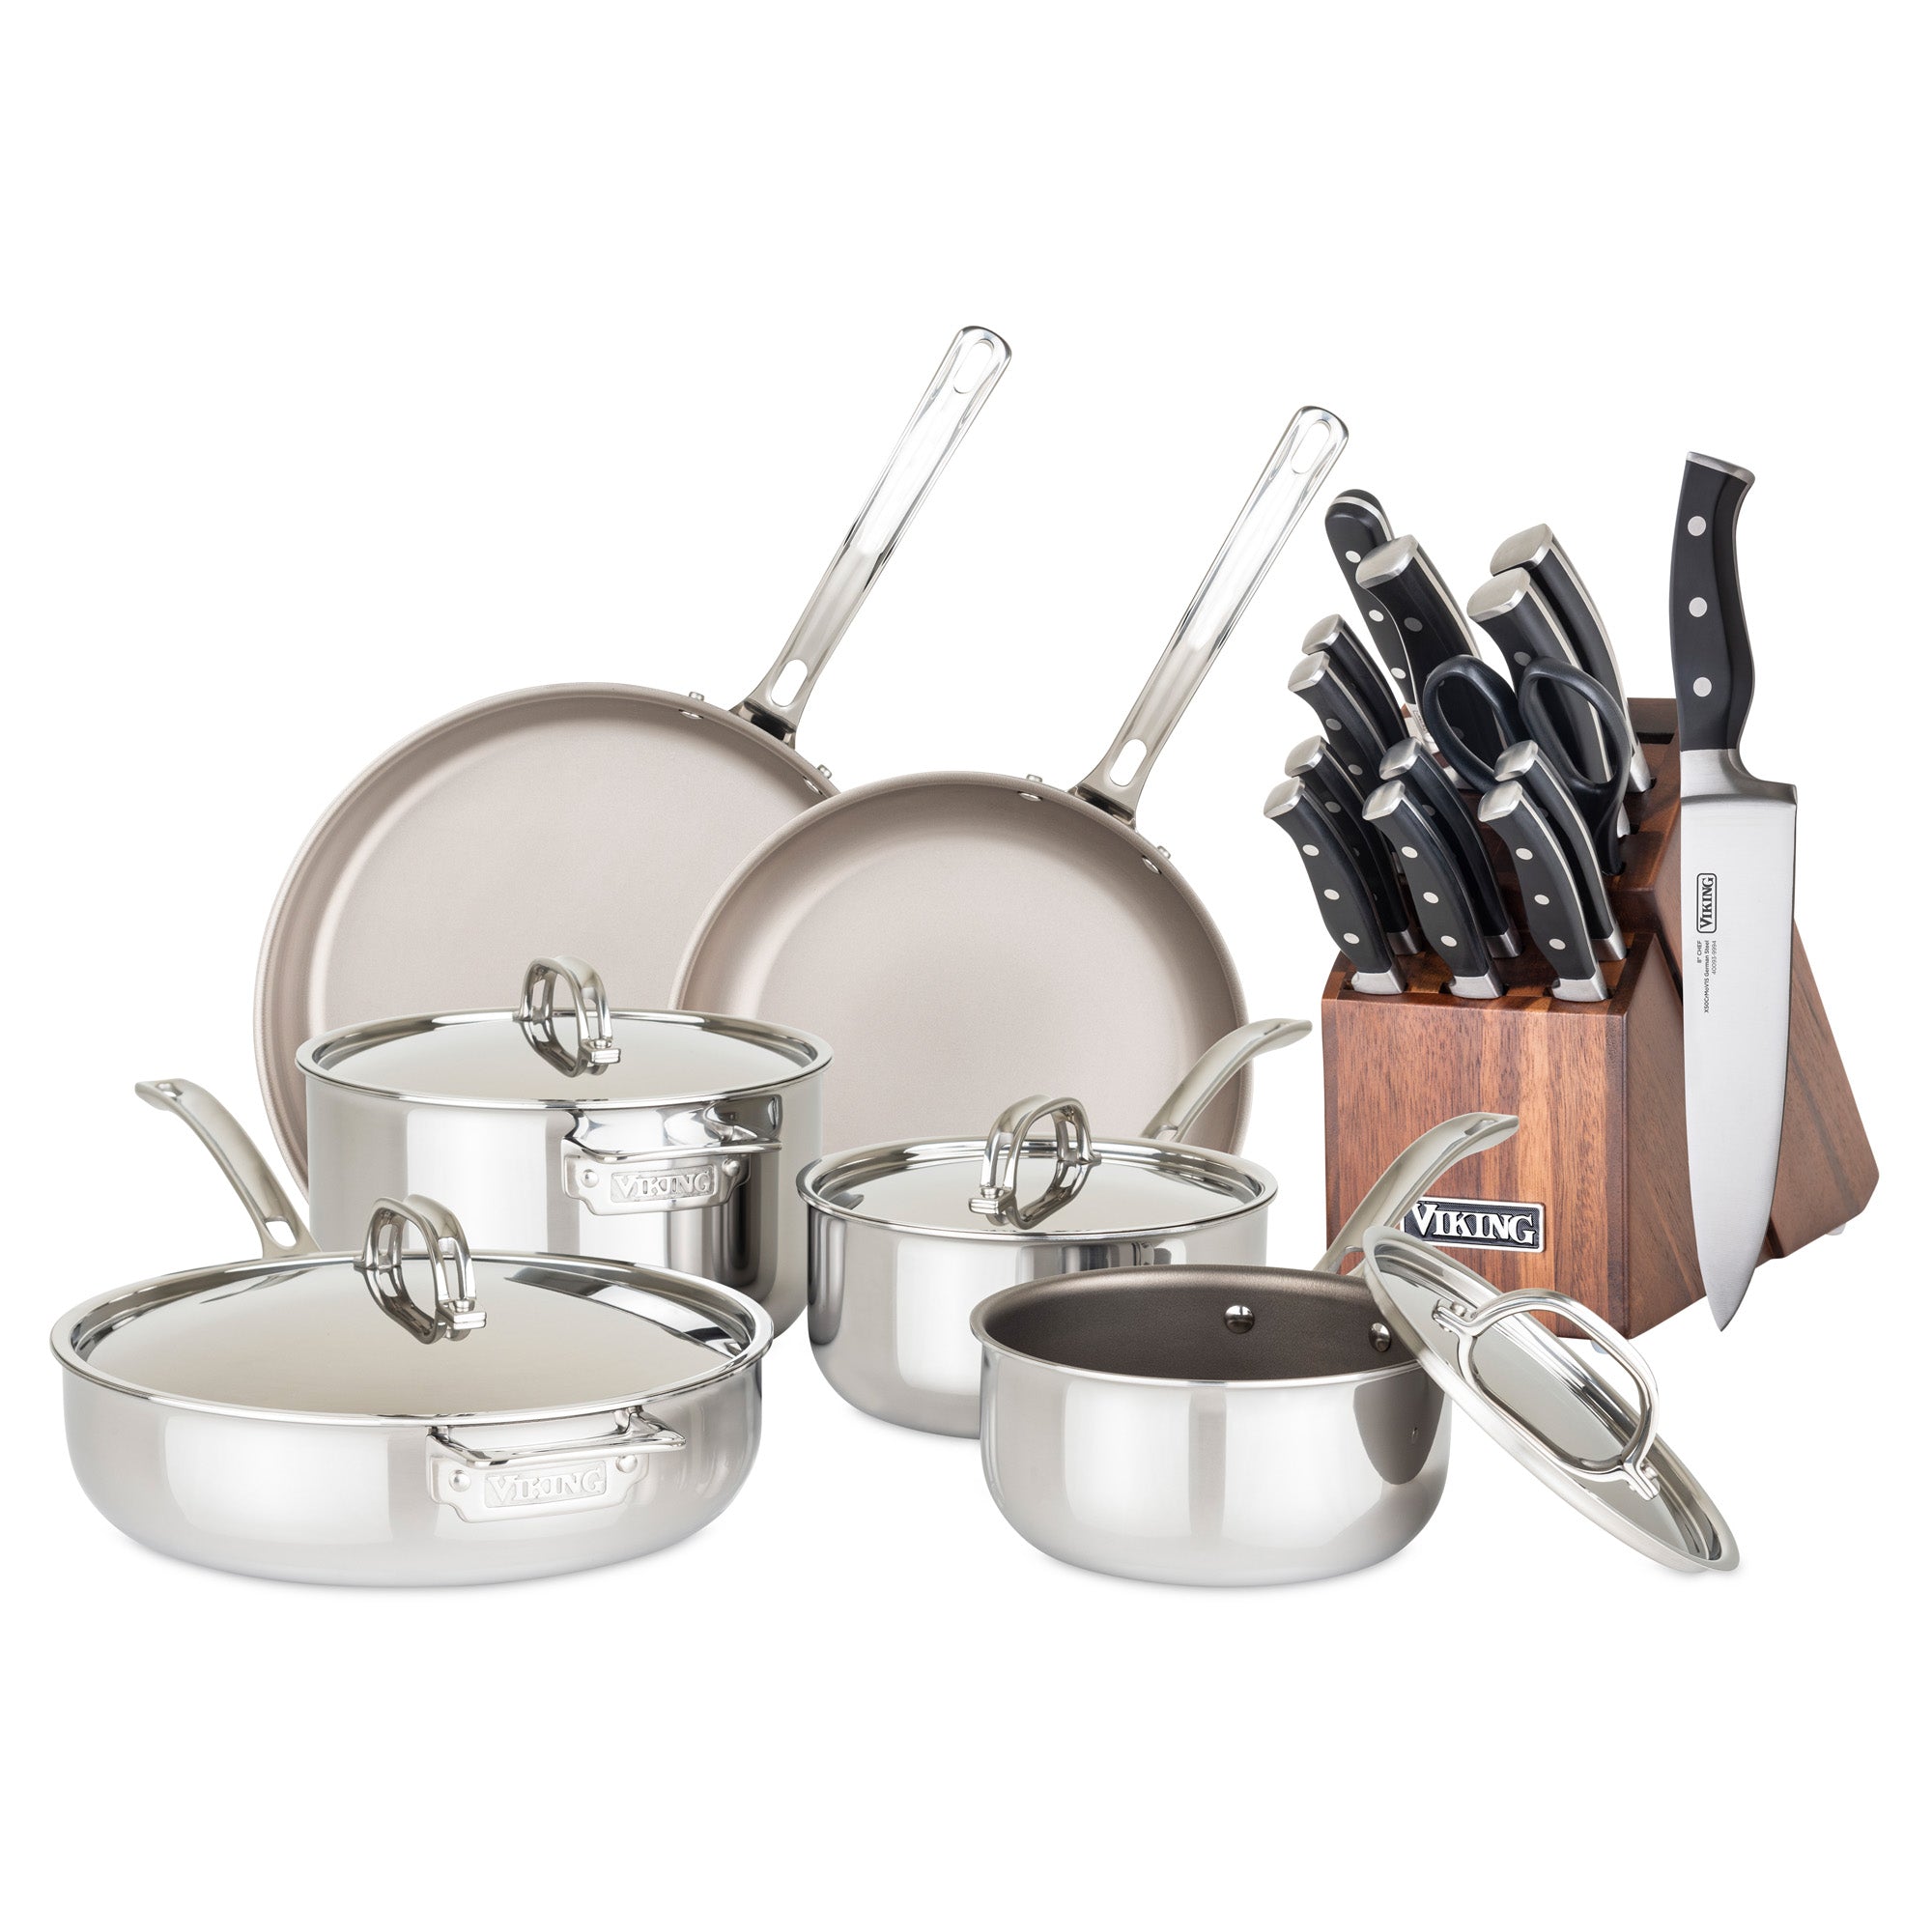 Cook N Home Pots and Pans Stainless Steel Cooking Set 7-Piece, Tri-Ply Clad  Kitchen Cookware Set, Dishwasher Safe, Glass Lid, Silver 